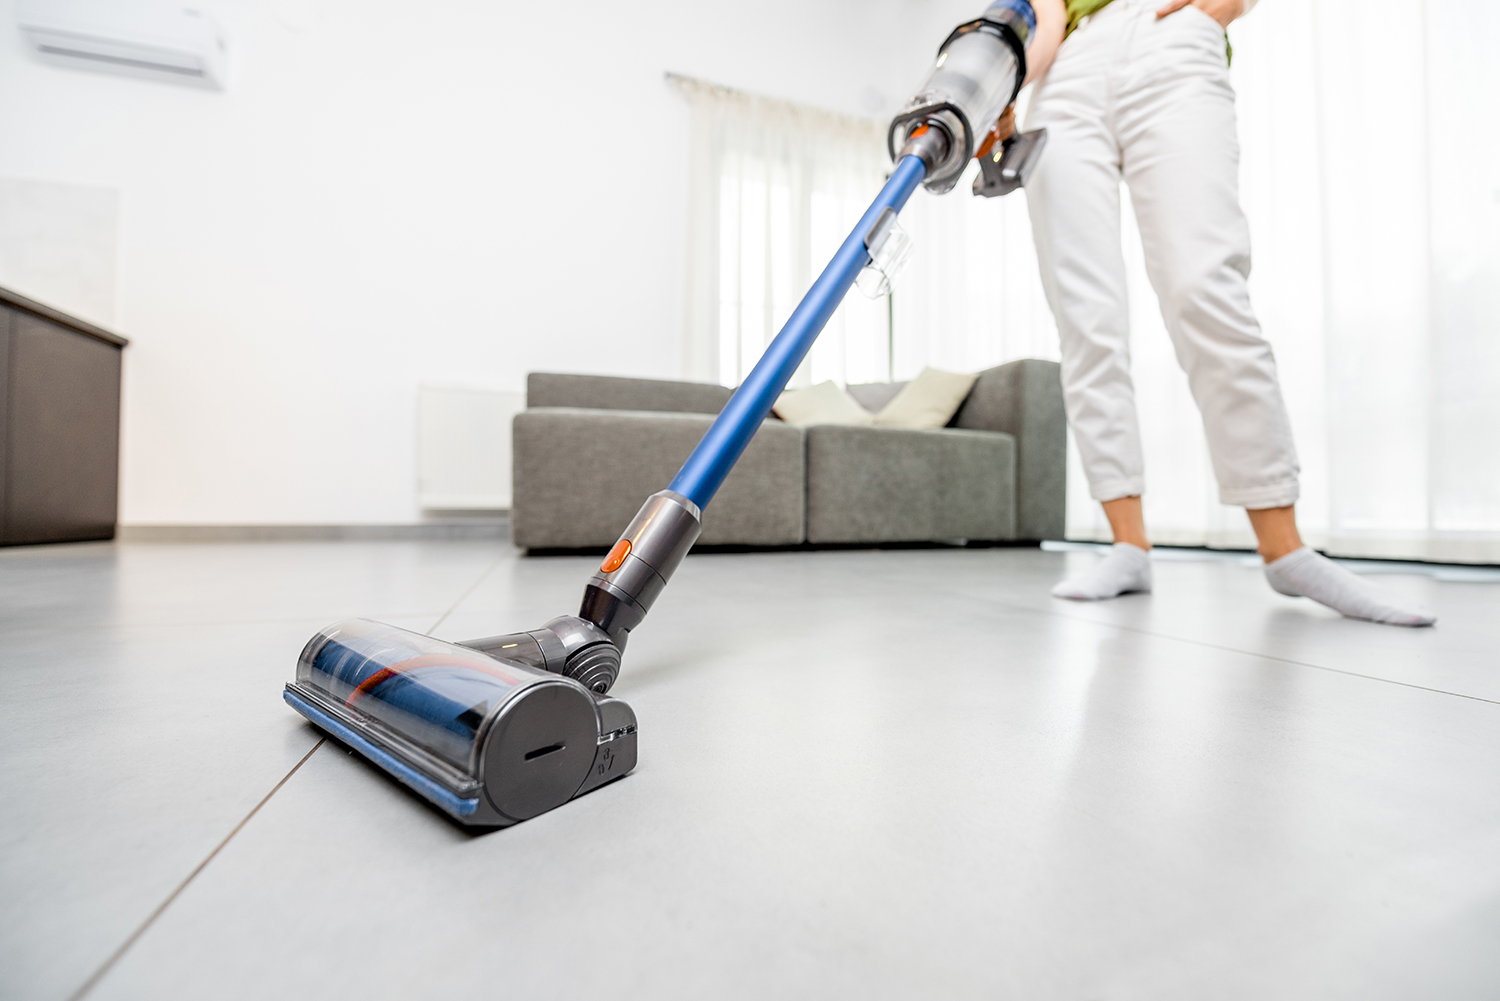 Cleaning floor with cordless vacuum cleaner in the modern white living room